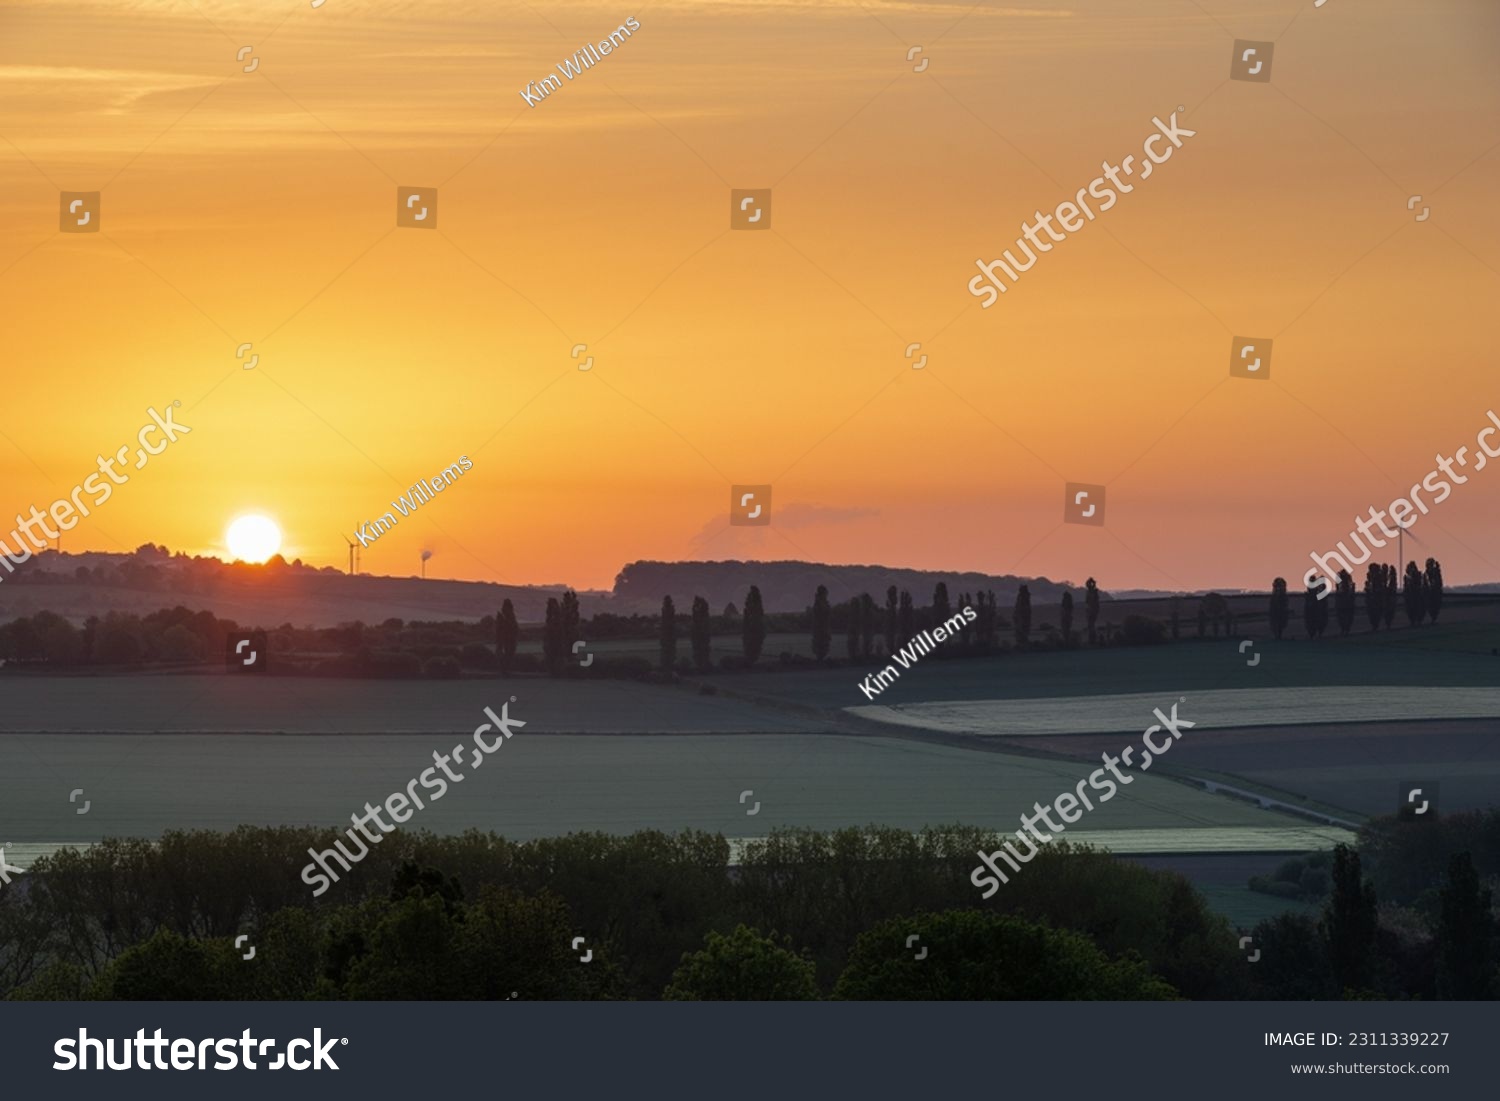 Sunrise in spring time with the silhouette of the typical Tuscan Poplar trees in a line alongside a road during the golden hour and the sun on the horizon. #2311339227